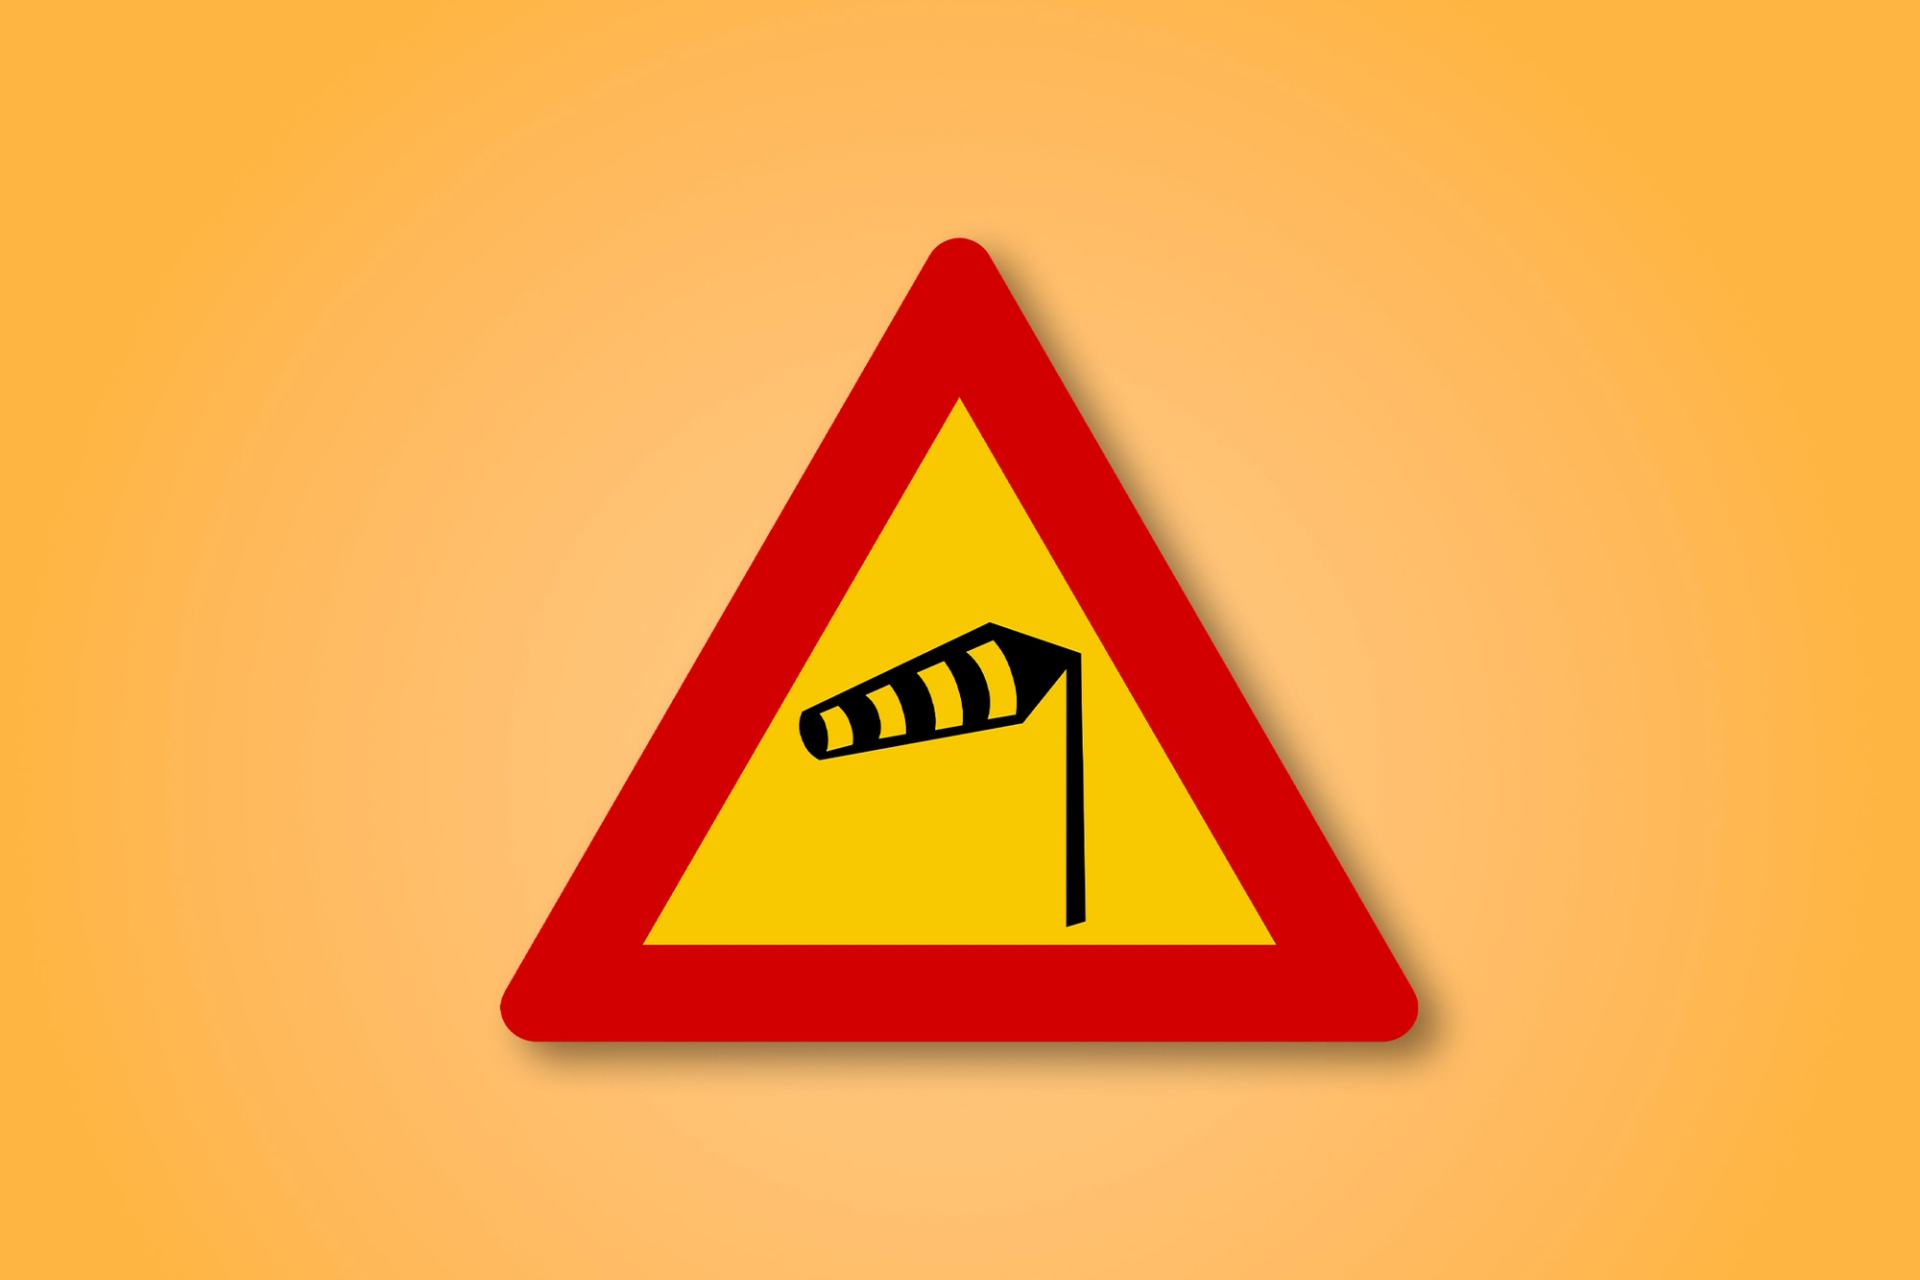 Red and yellow triangle road sign with a wind in the middle. This road sign means Crosswinds